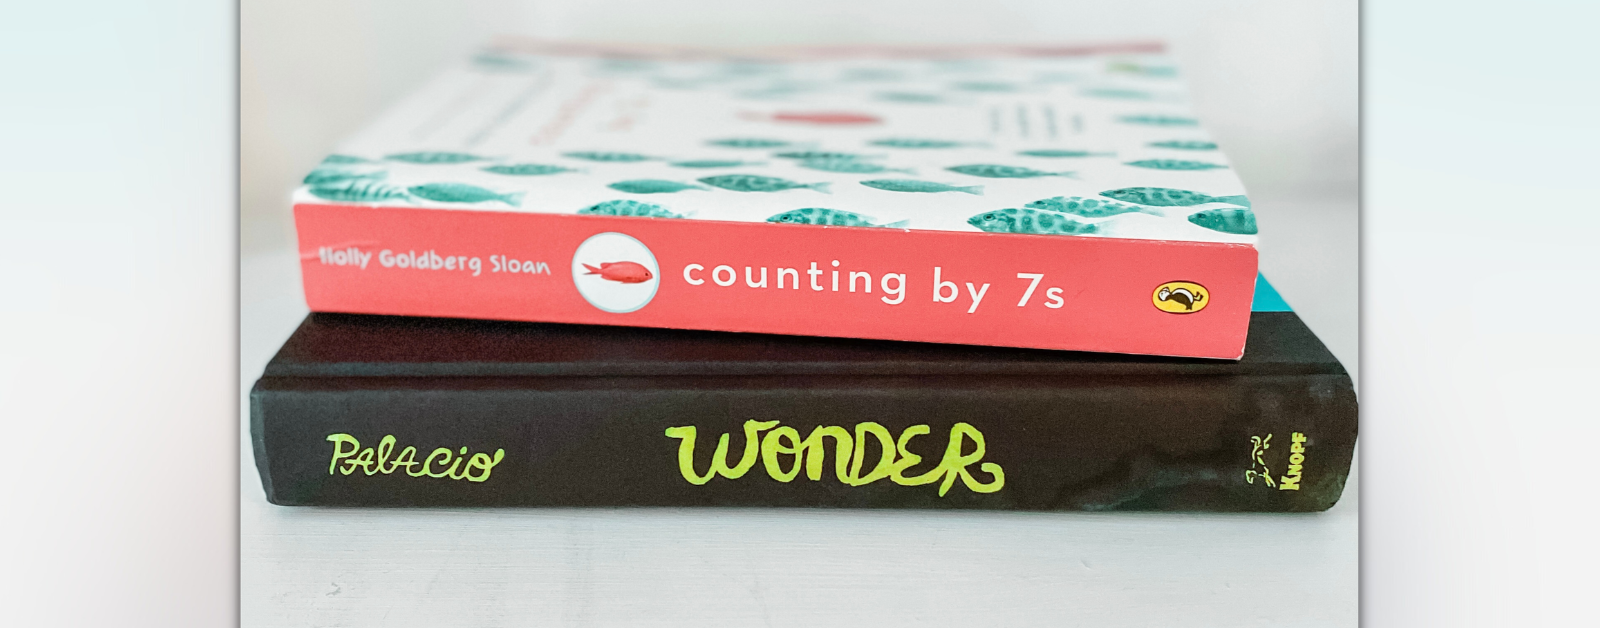 the book Counting by 7s stacked on top of the book Wonder